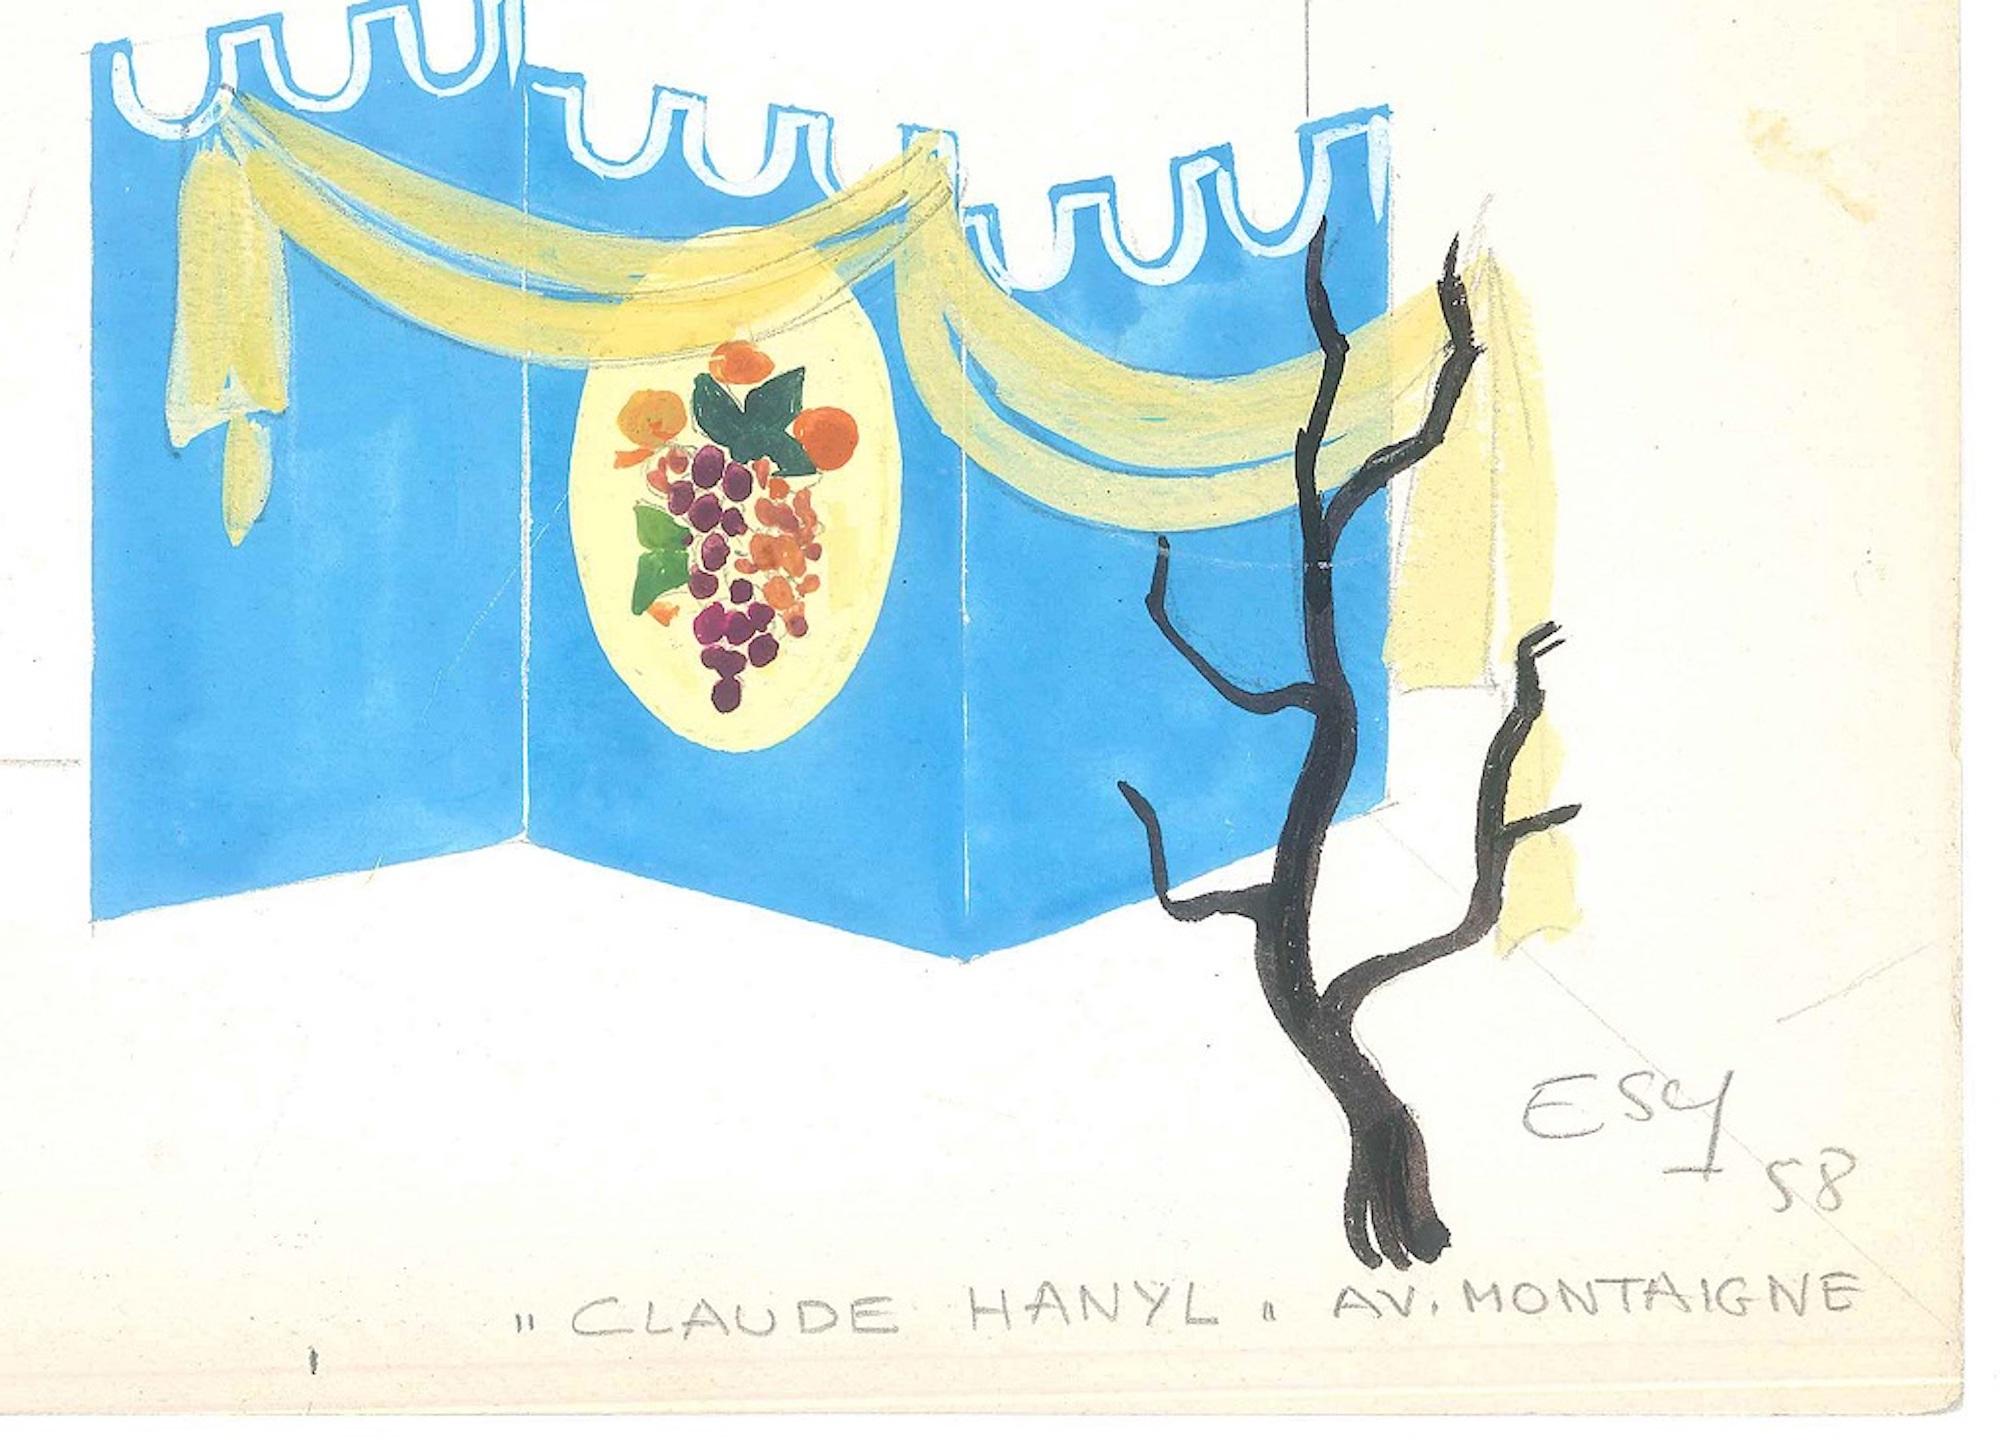 Panels is an original artwork realized by Esy Beluzzi in 1958. 

Original tempera on paper. 

Hand-signed and dated in pencil on the lower right corner. 

On the lower right corner of the sheet appears in capital letters "Charles Hanyl " Av.